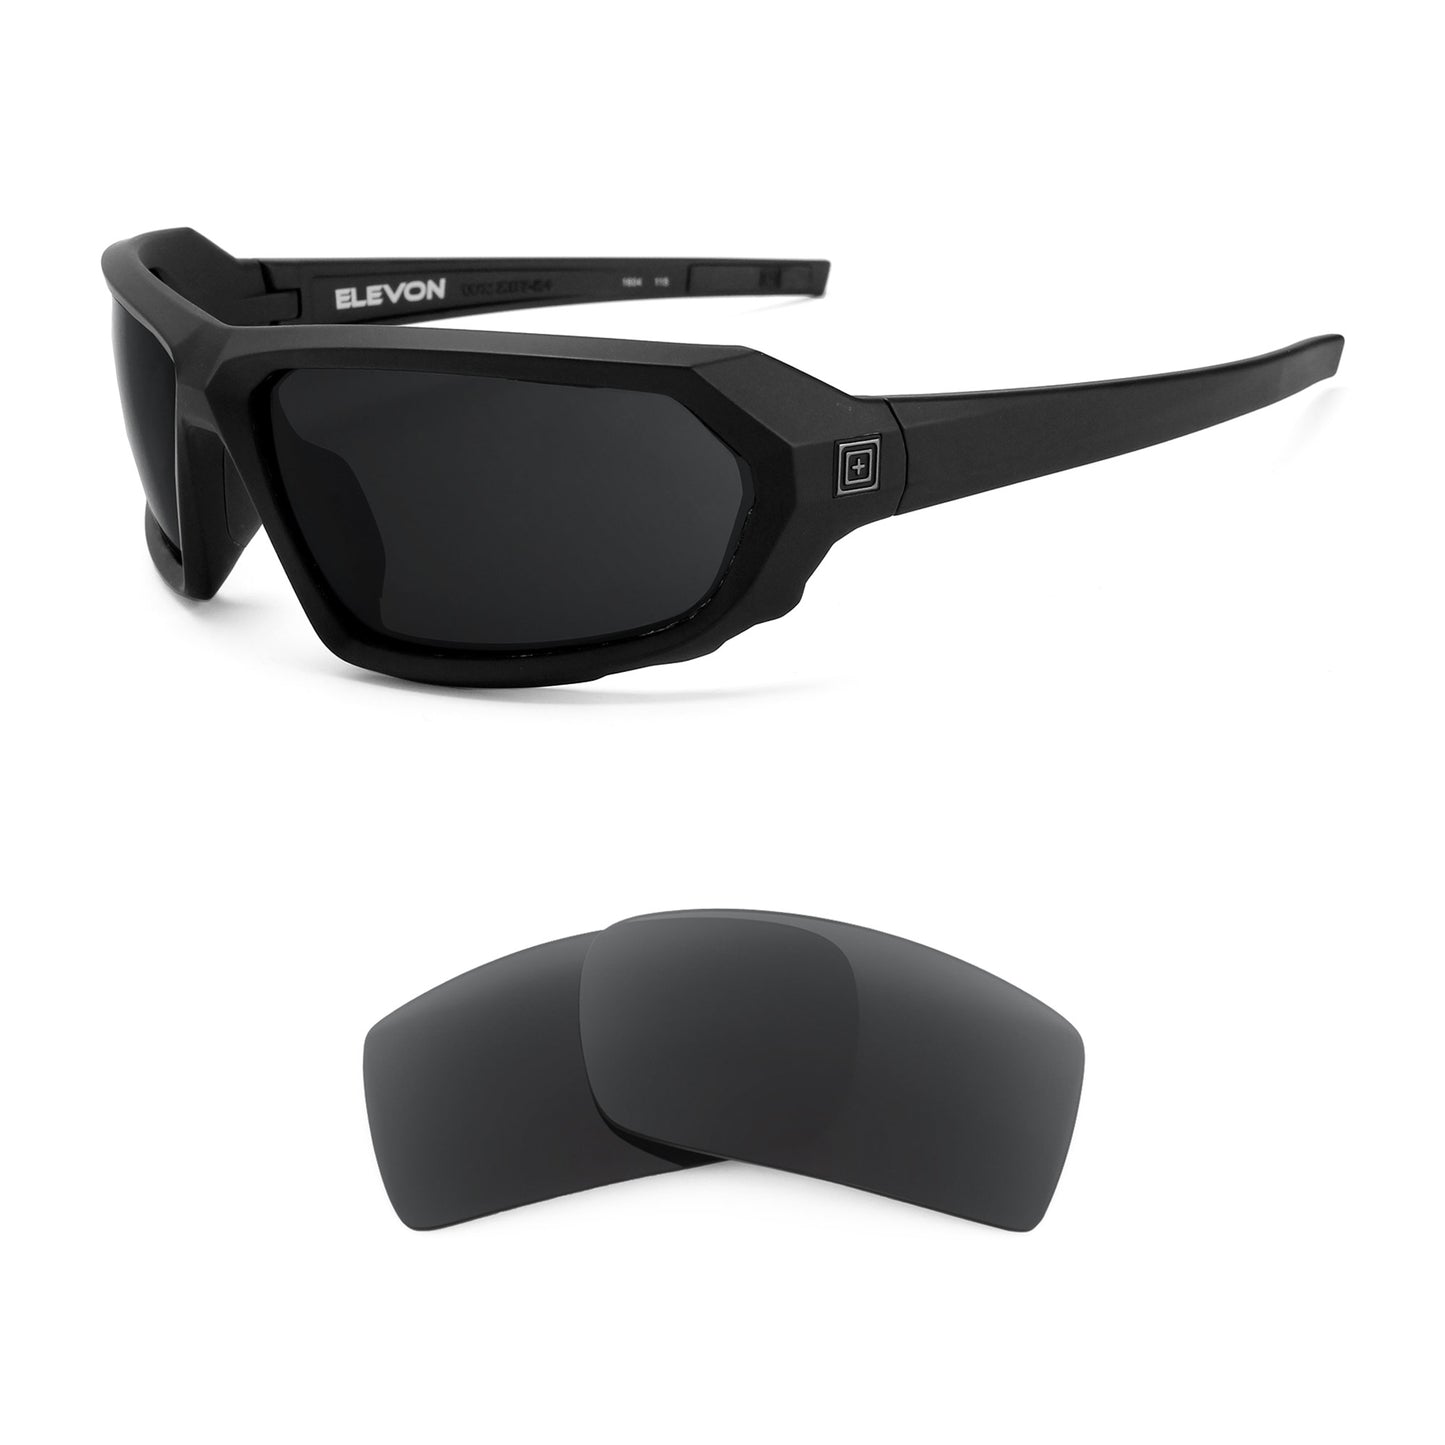 5.11 Tactical Elevon sunglasses with replacement lenses